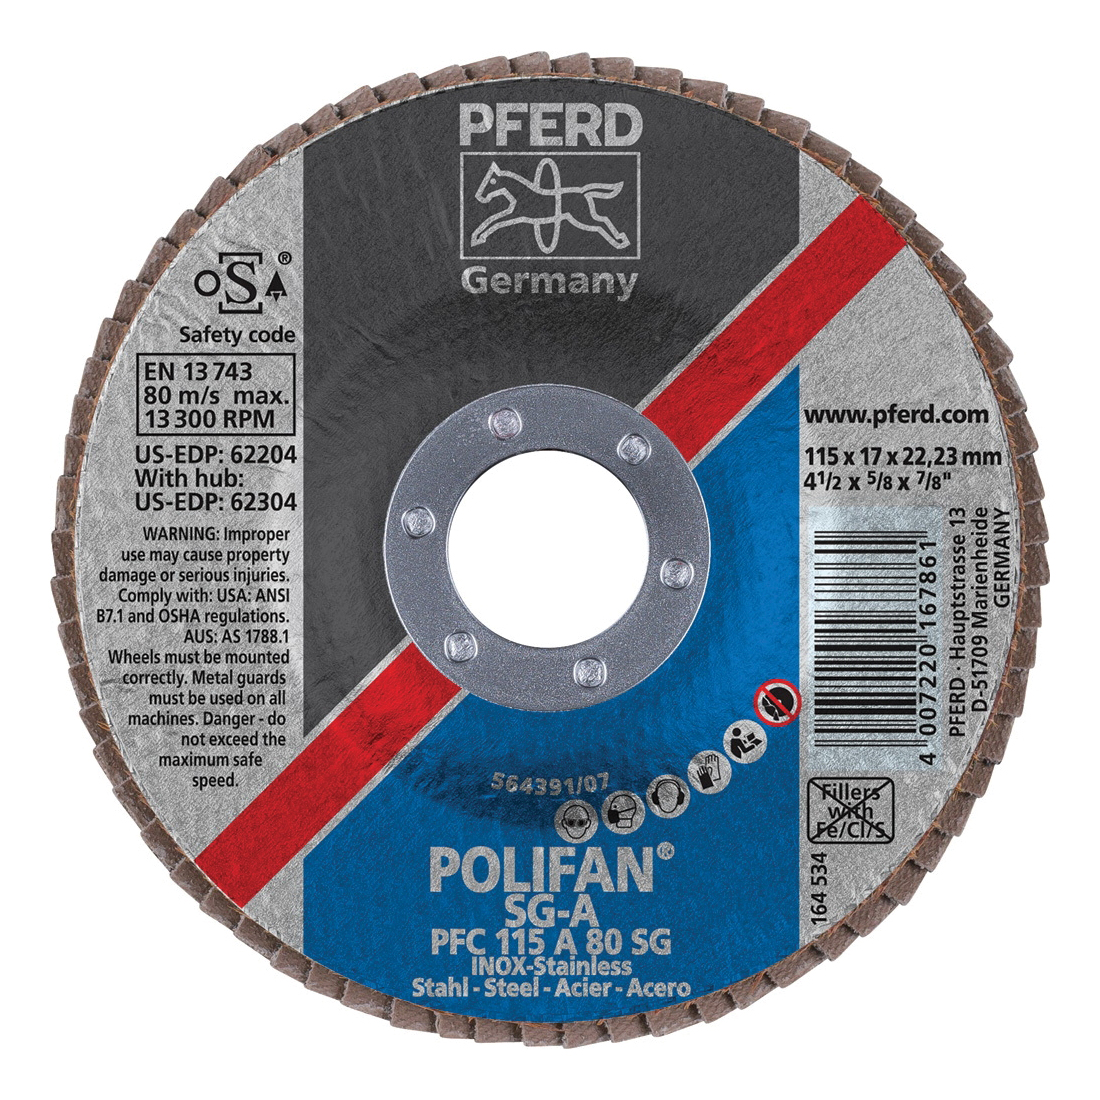 PFERD Polifan® 62204 Performance Line SG A Unthreaded Coated Abrasive Flap Disc, 4-1/2 in Dia, 7/8 in Center Hole, 80 Grit, Aluminum Oxide Abrasive, Type 29 Conical Disc